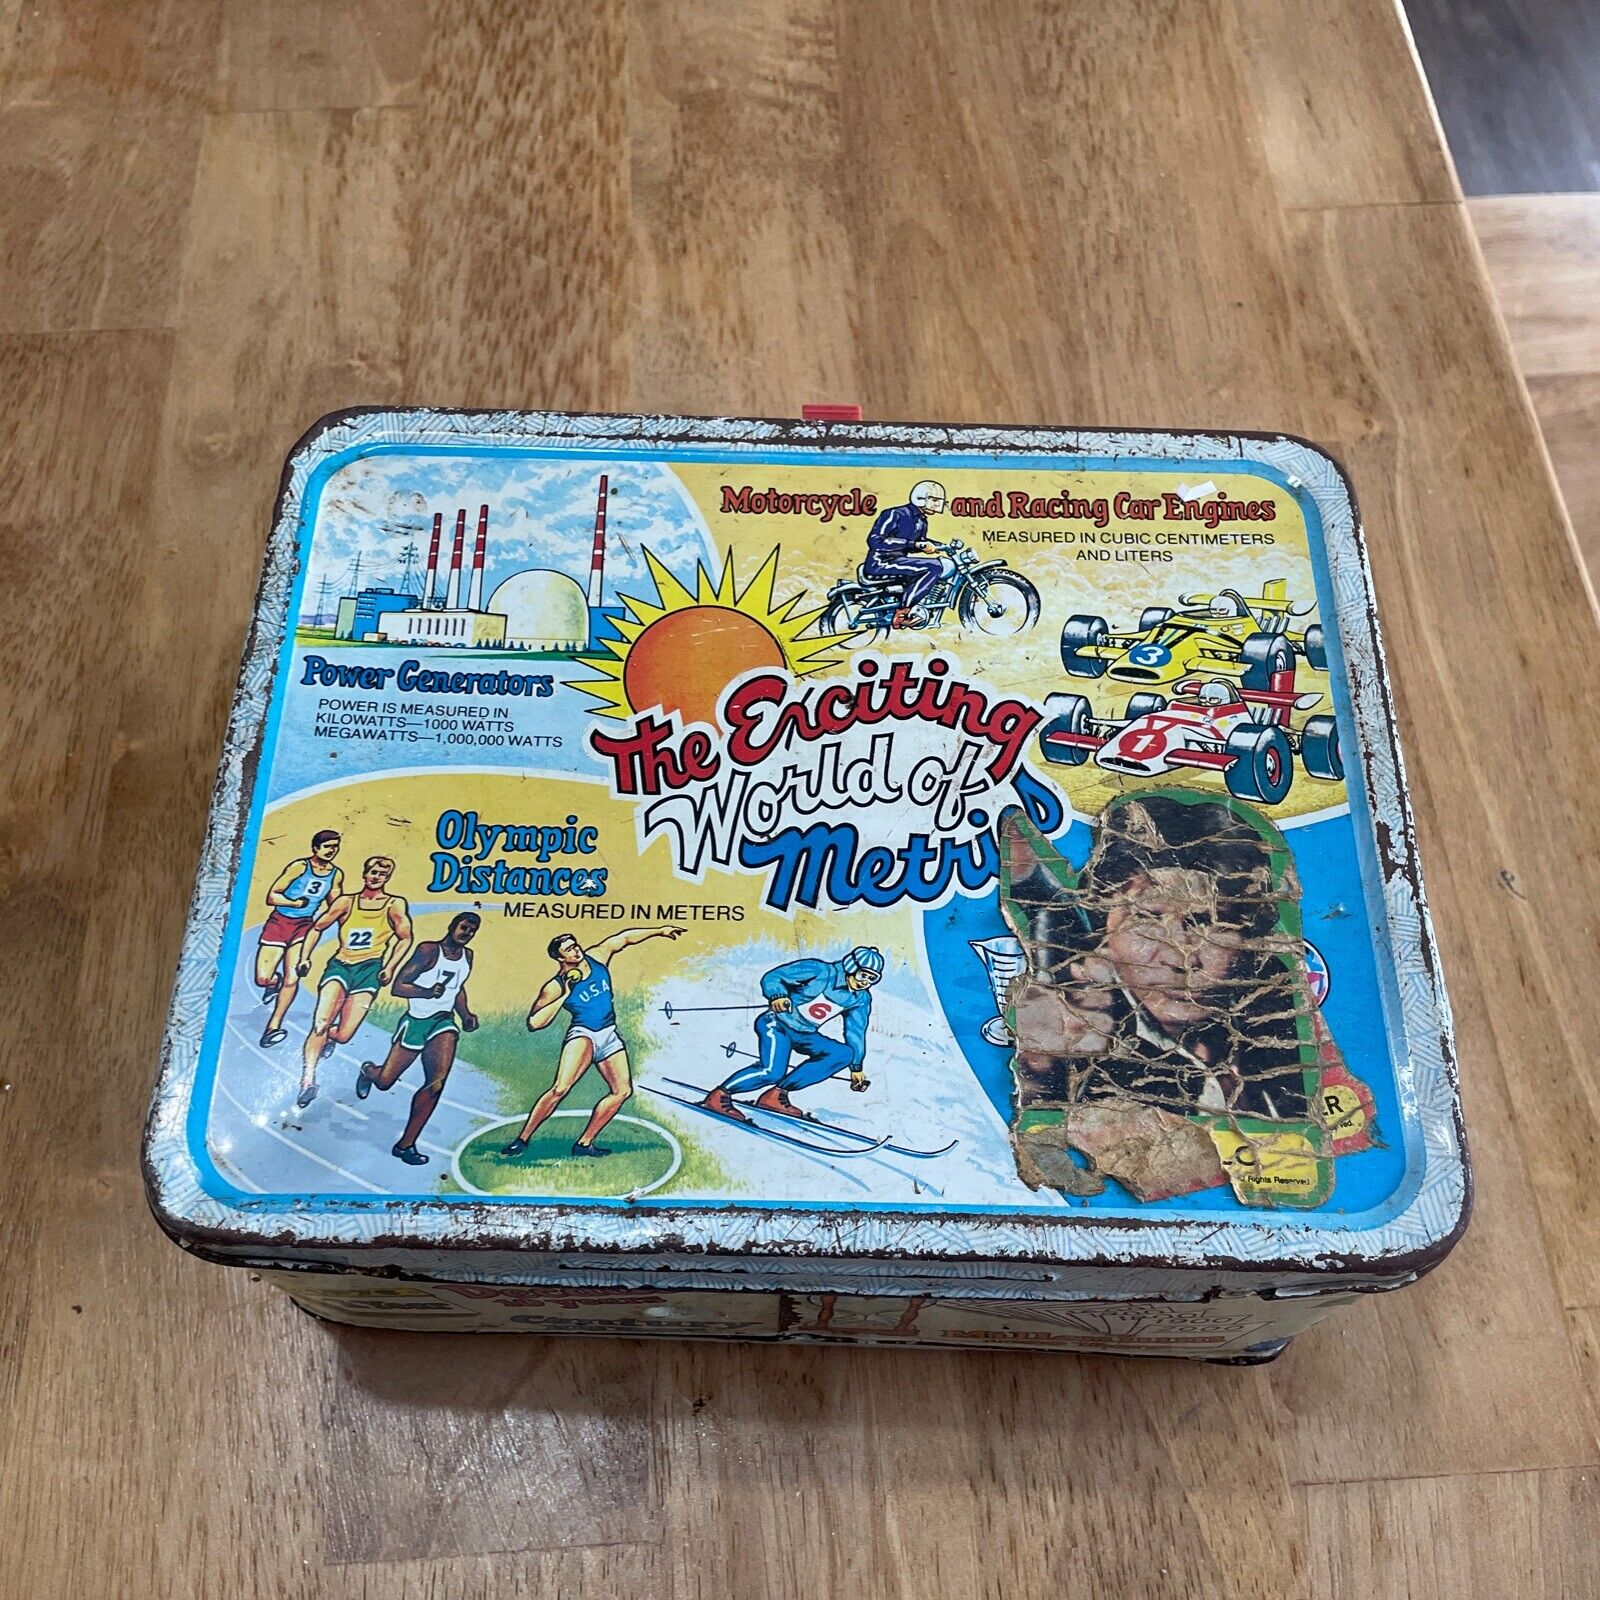 Vintage 1976 The Exciting World of Metrics Metal Lunchbox